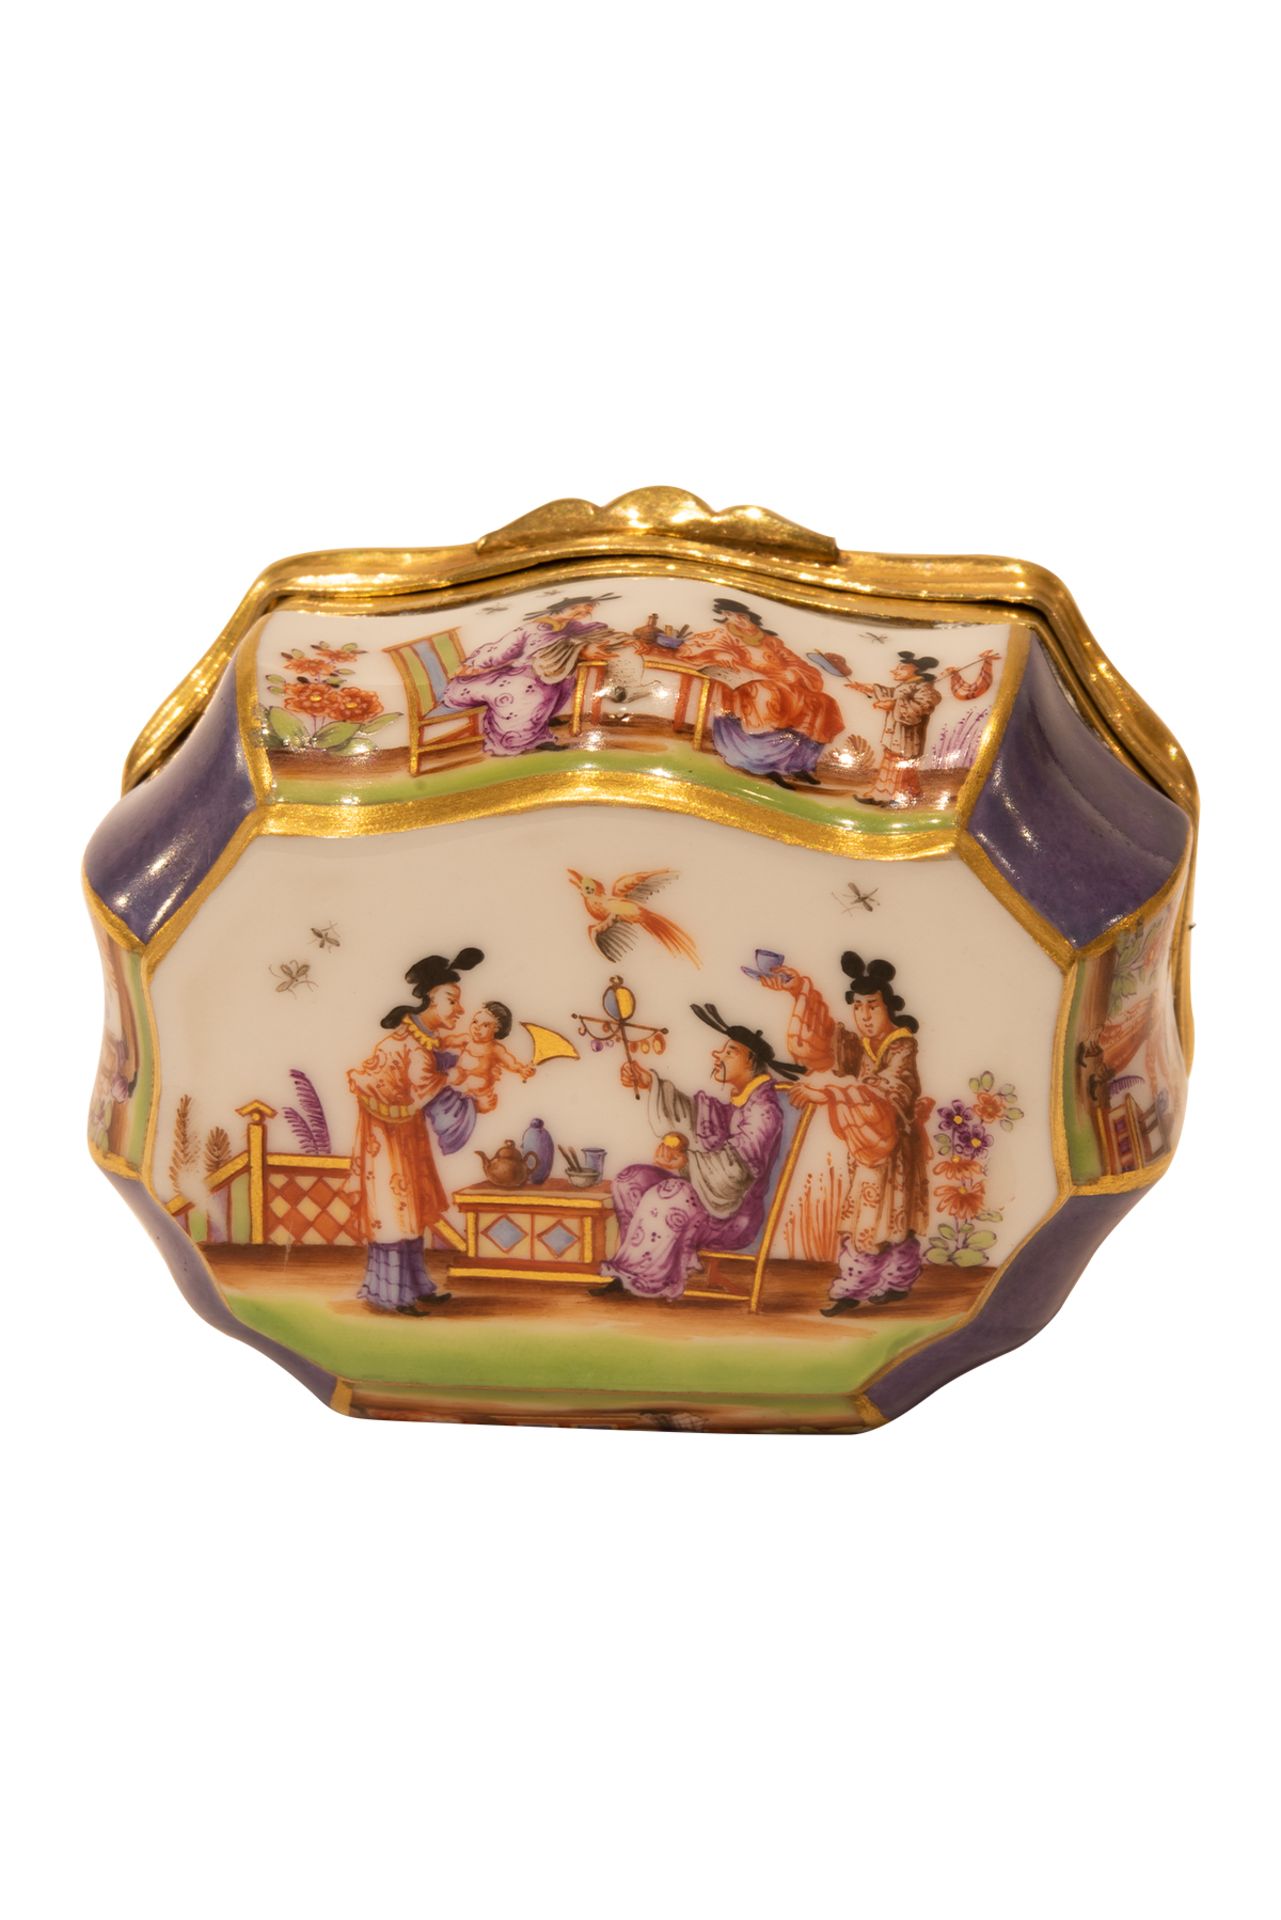 Tabatiere with chinoiseries, Meissen around 1750 - Image 8 of 8